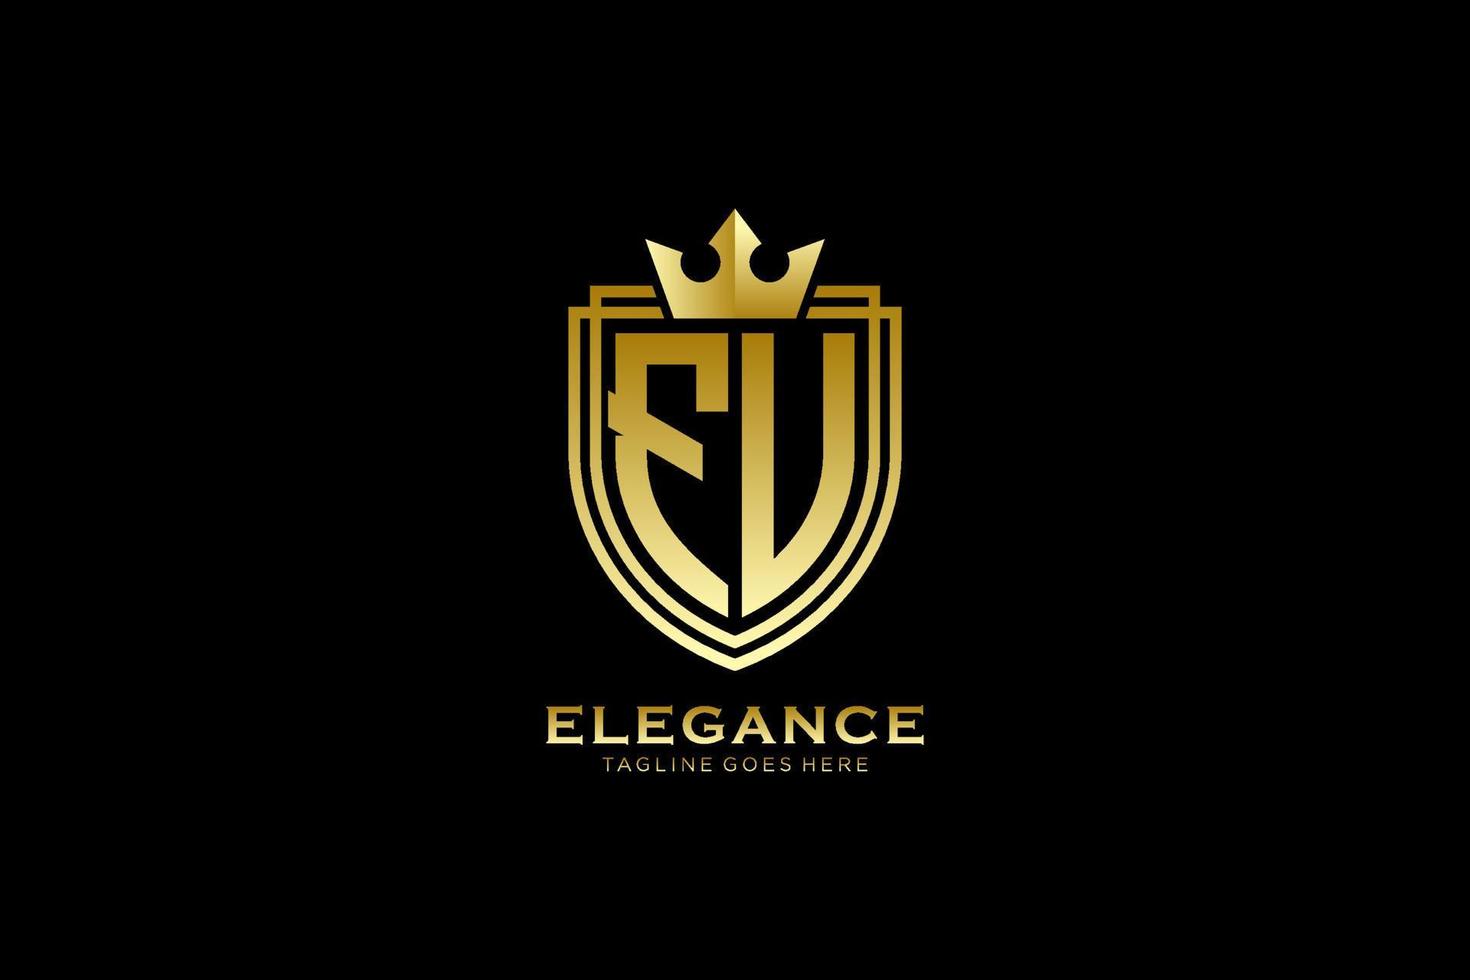 initial FU elegant luxury monogram logo or badge template with scrolls and royal crown - perfect for luxurious branding projects vector